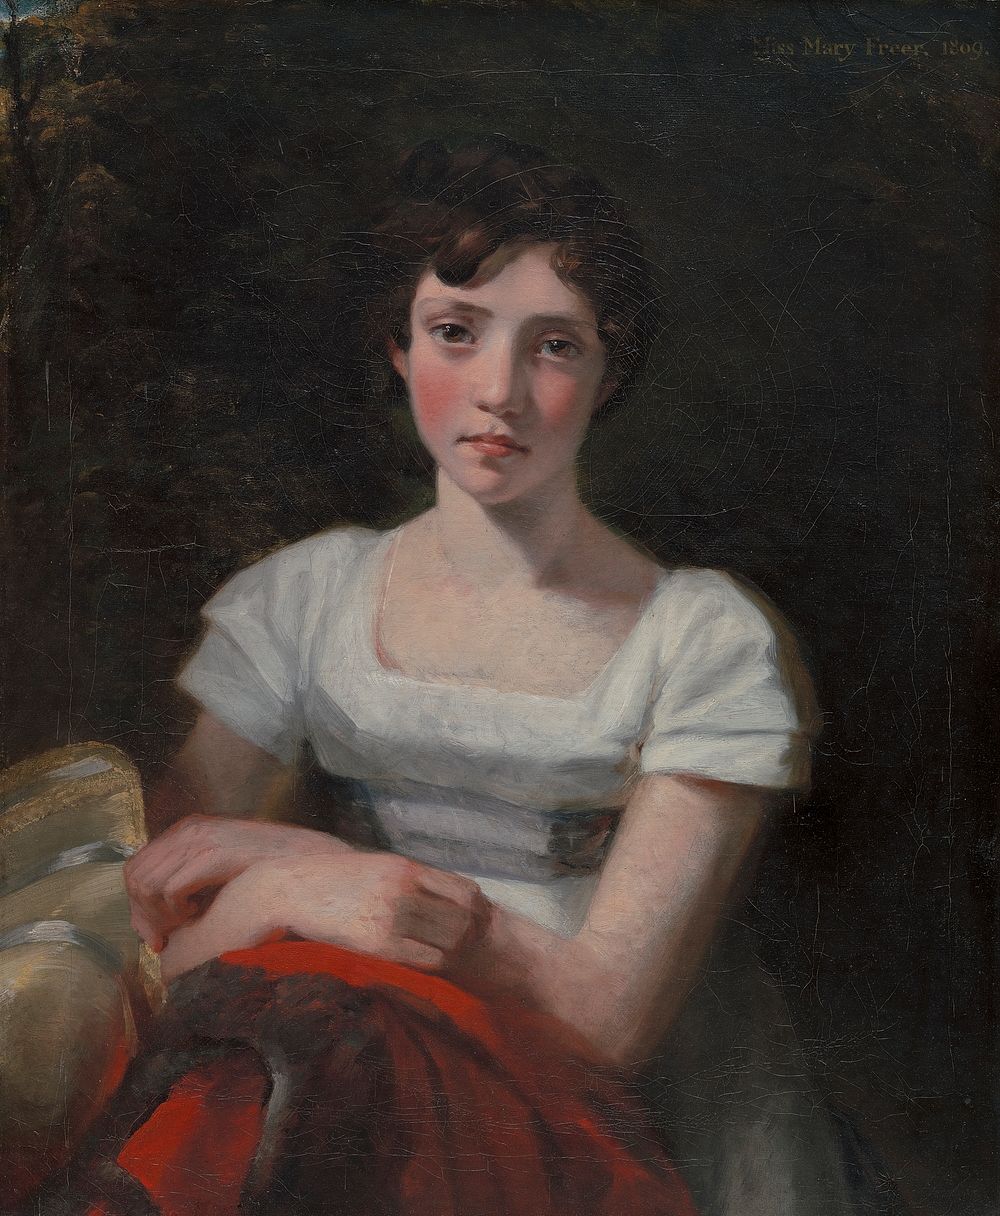 Mary Freer by John Constable